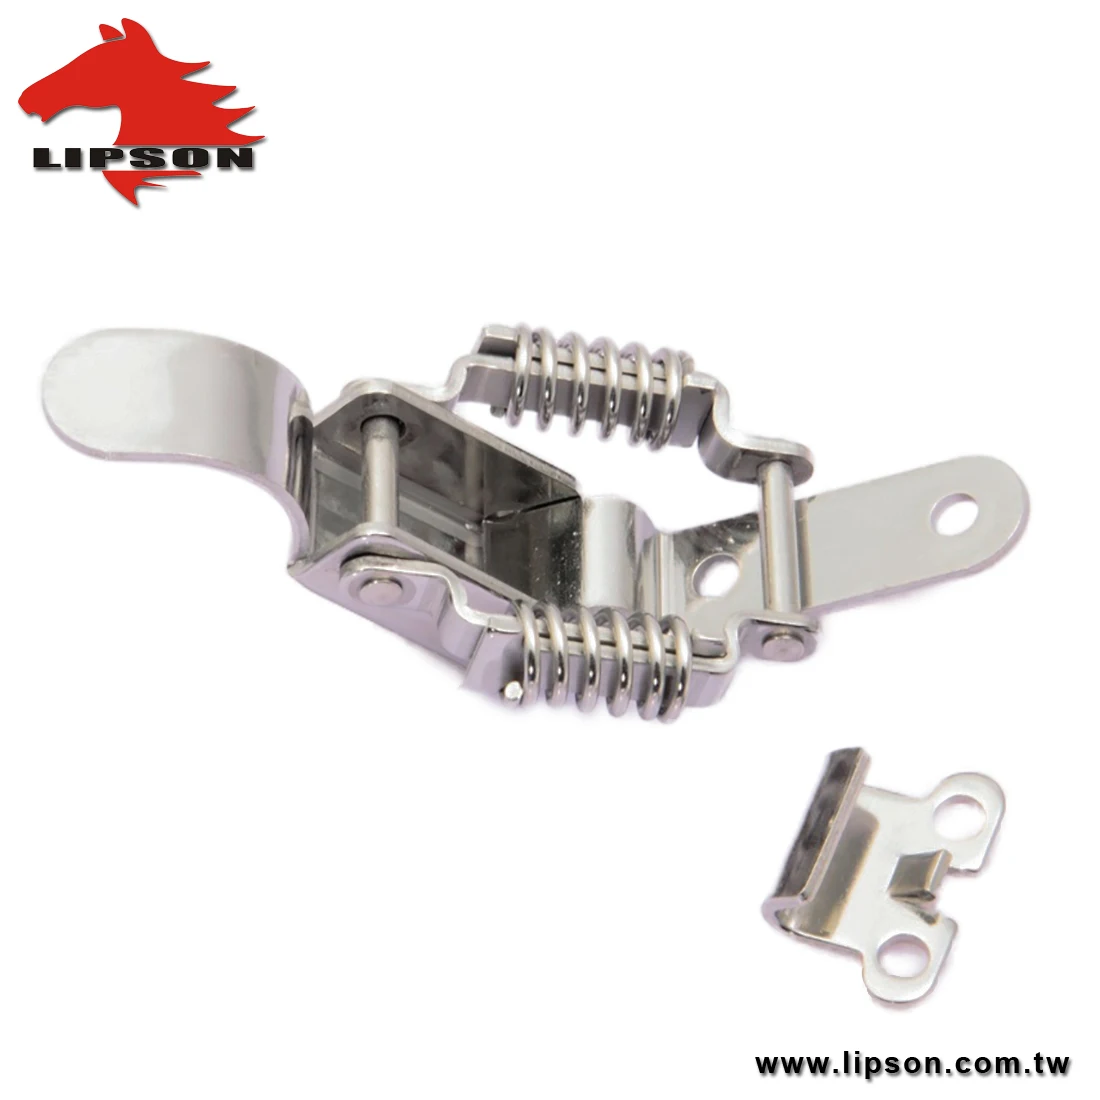 Vertical & Damping Toggle Latch Industrial Stainless Steel Hardware Lock  Hasp Toggle Draw Latch Self Lock Latch - China Toggle Latch, Toggle Clamp